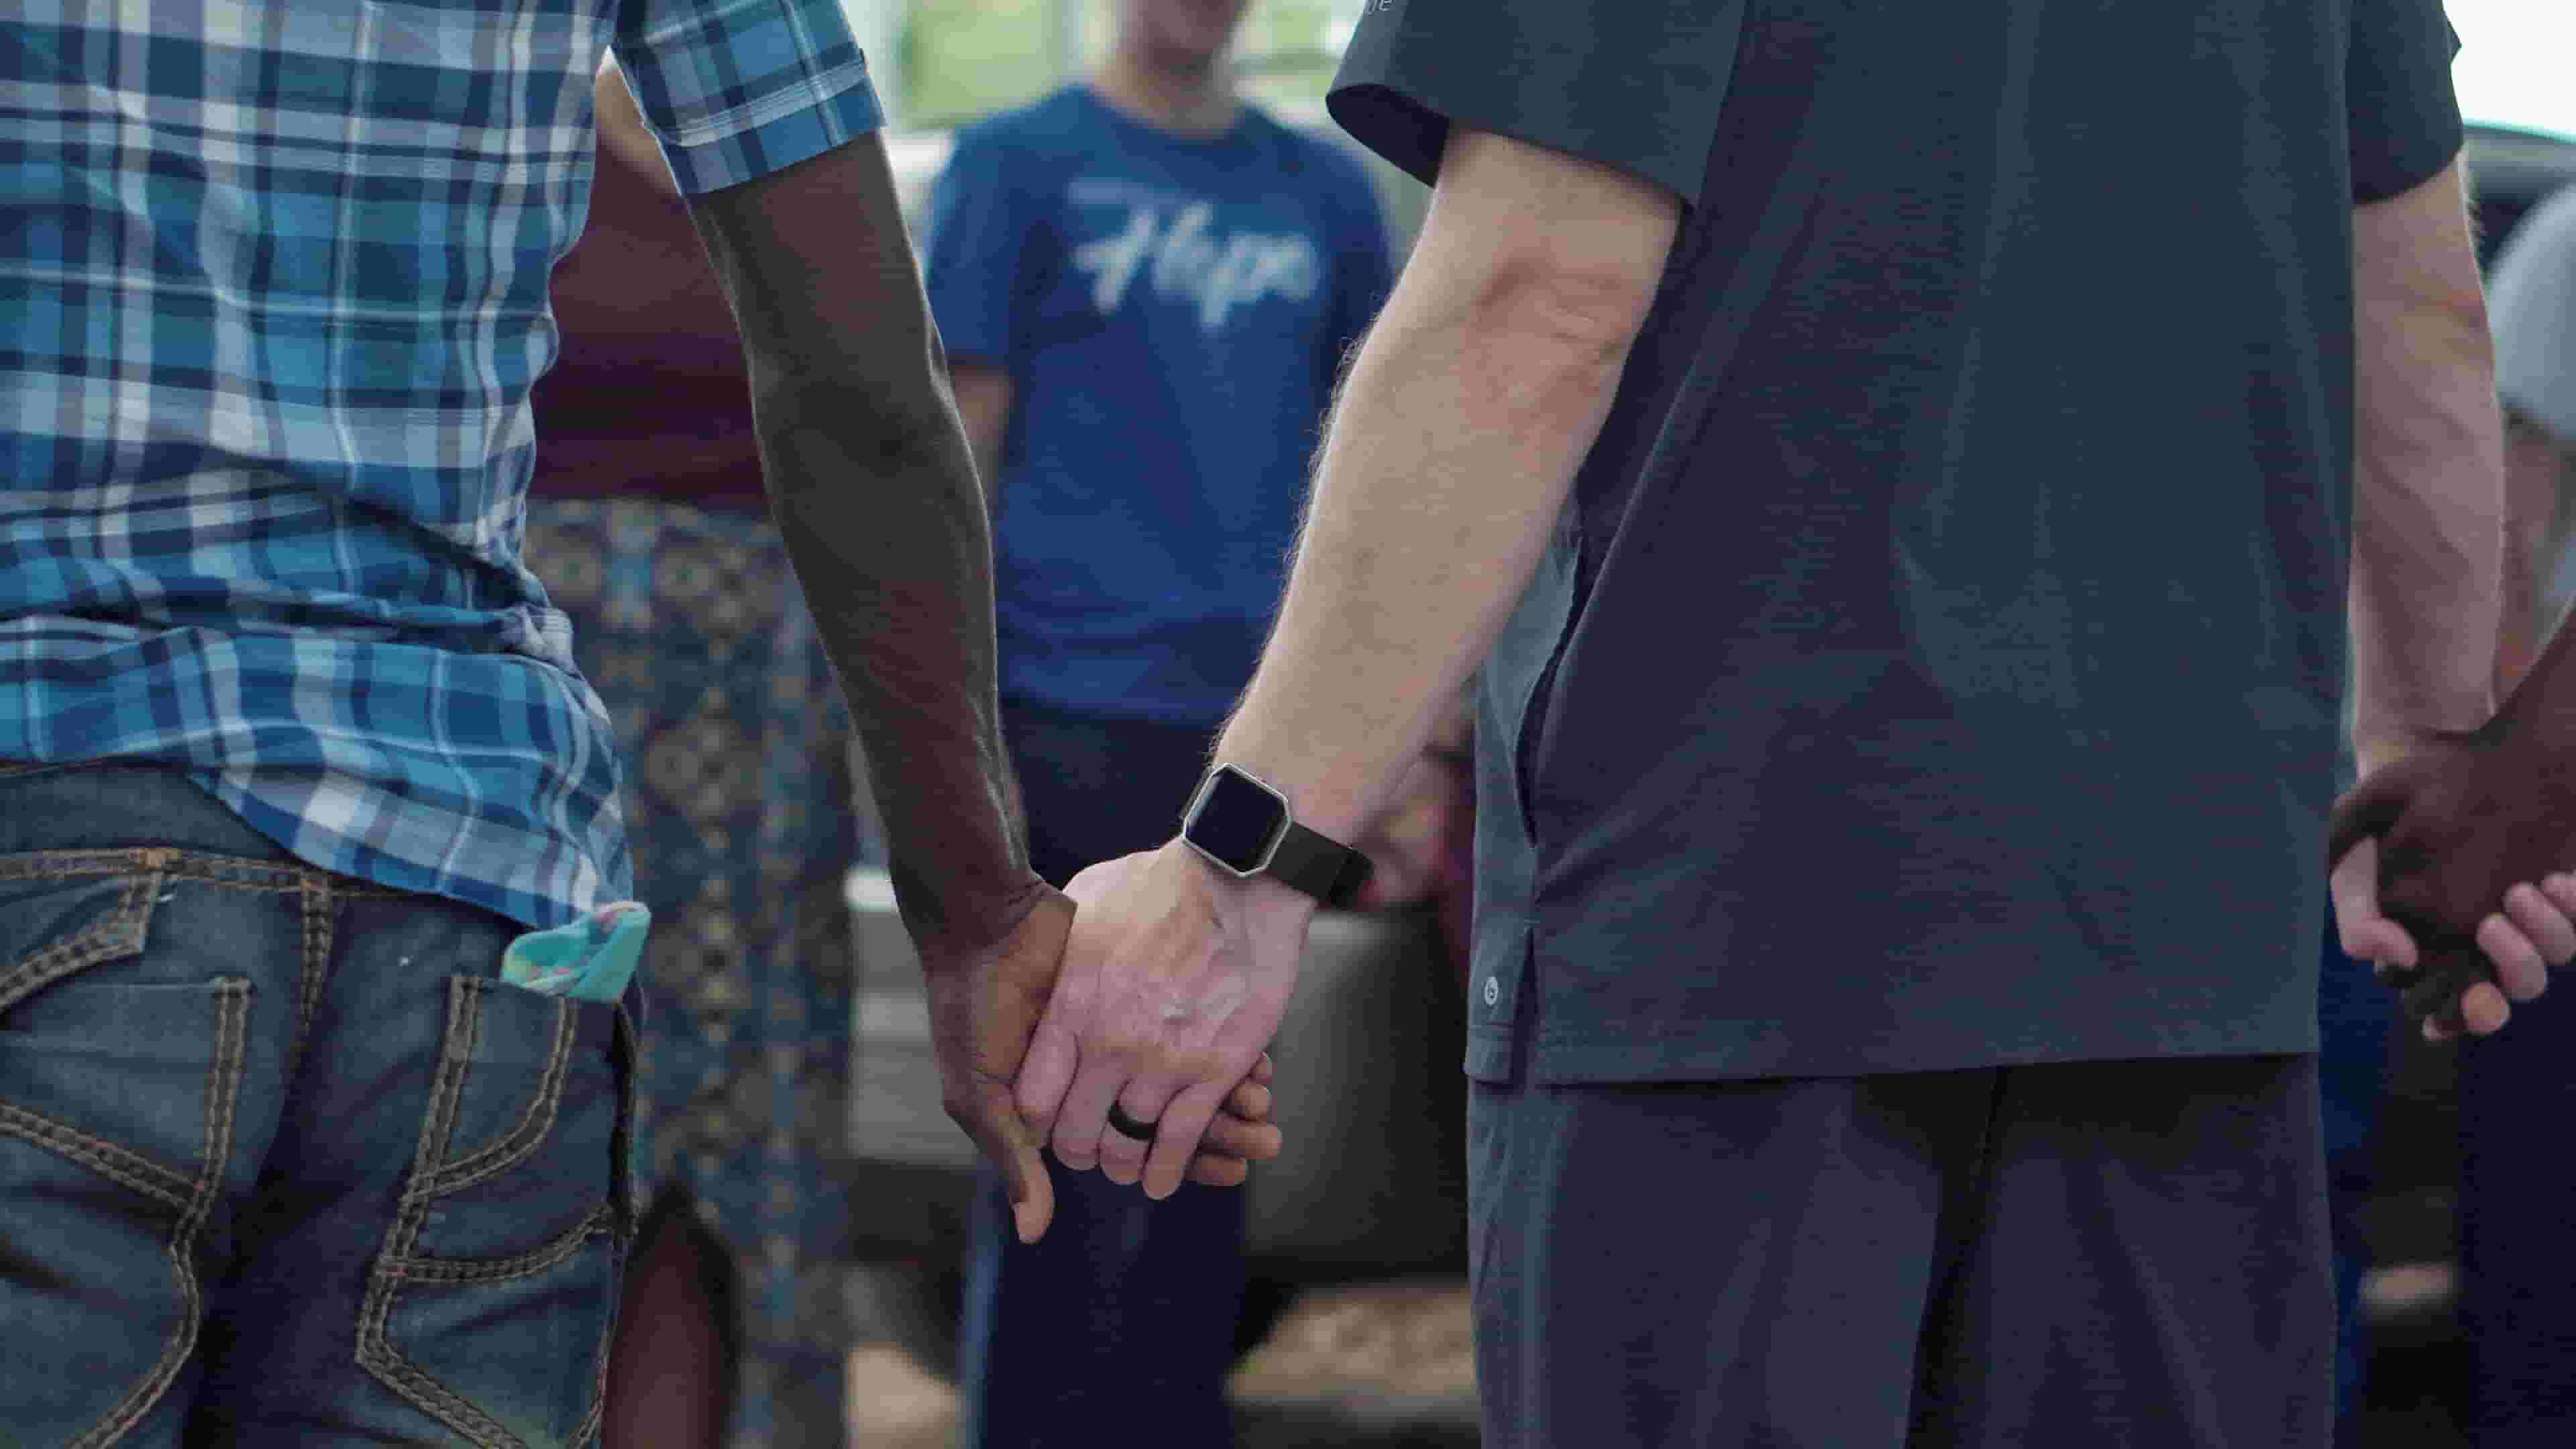 Two men hold hands, offering each other support